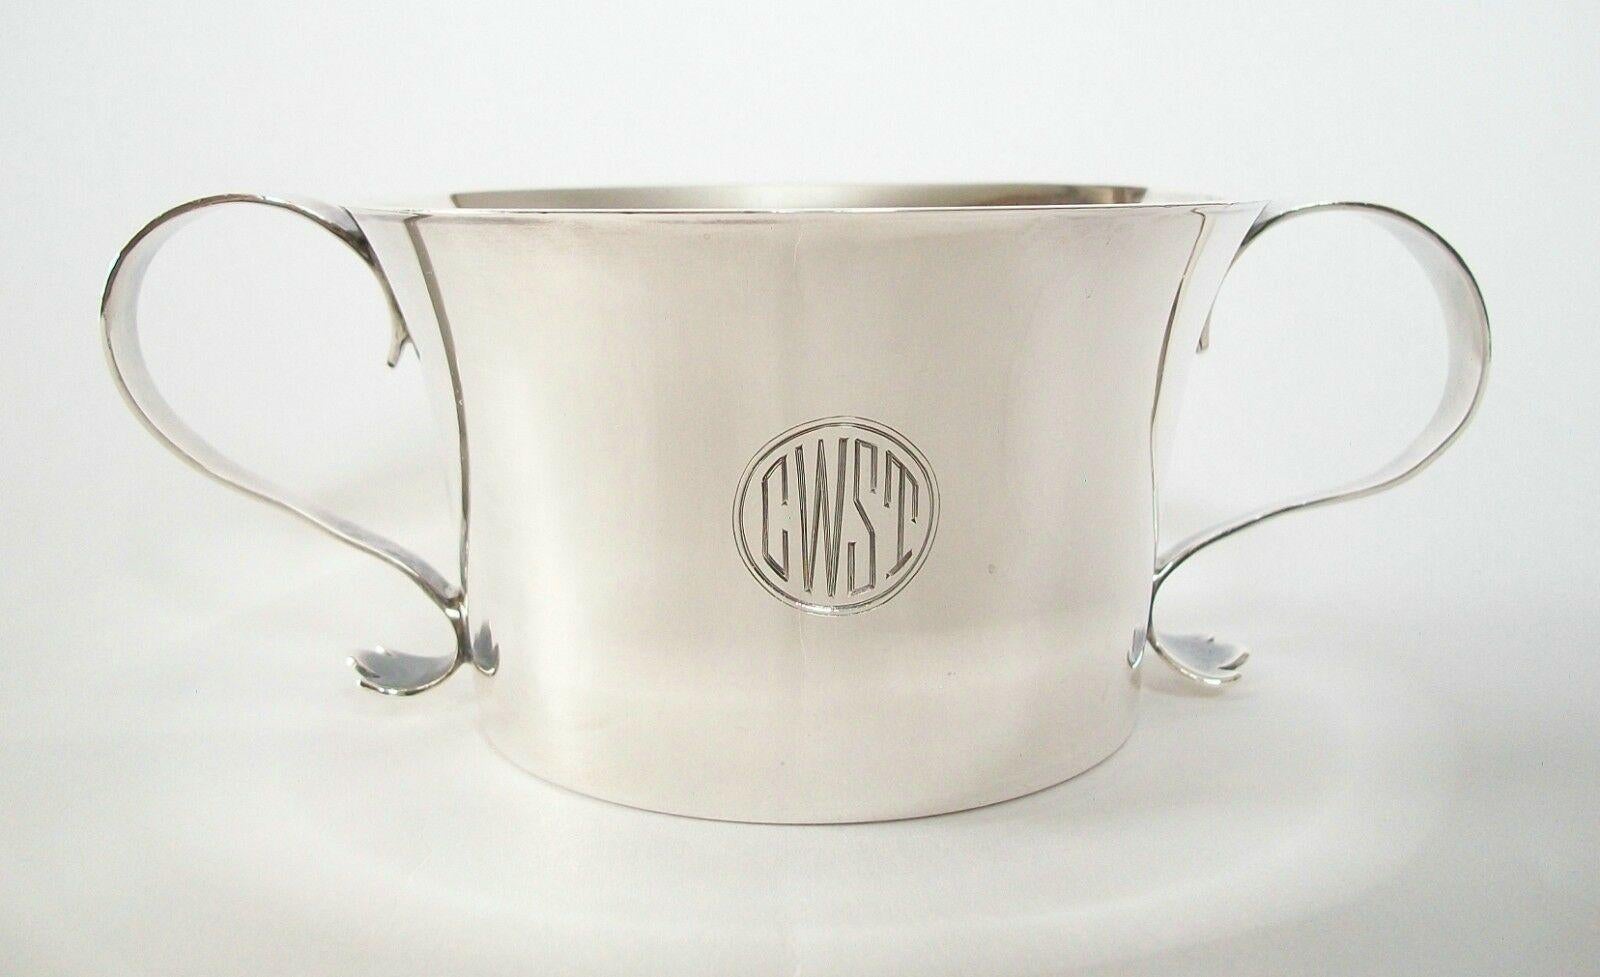 THOMAS BRADBURY & SONS (Sheffield) - Fine quality Art Deco Britannia silver twin handled Christening cup - gently sloping sides - S shaped handles - 'CWST' Art Deco monogram within a circular cartouche - engraved date of July 2nd, 1927 on the bottom